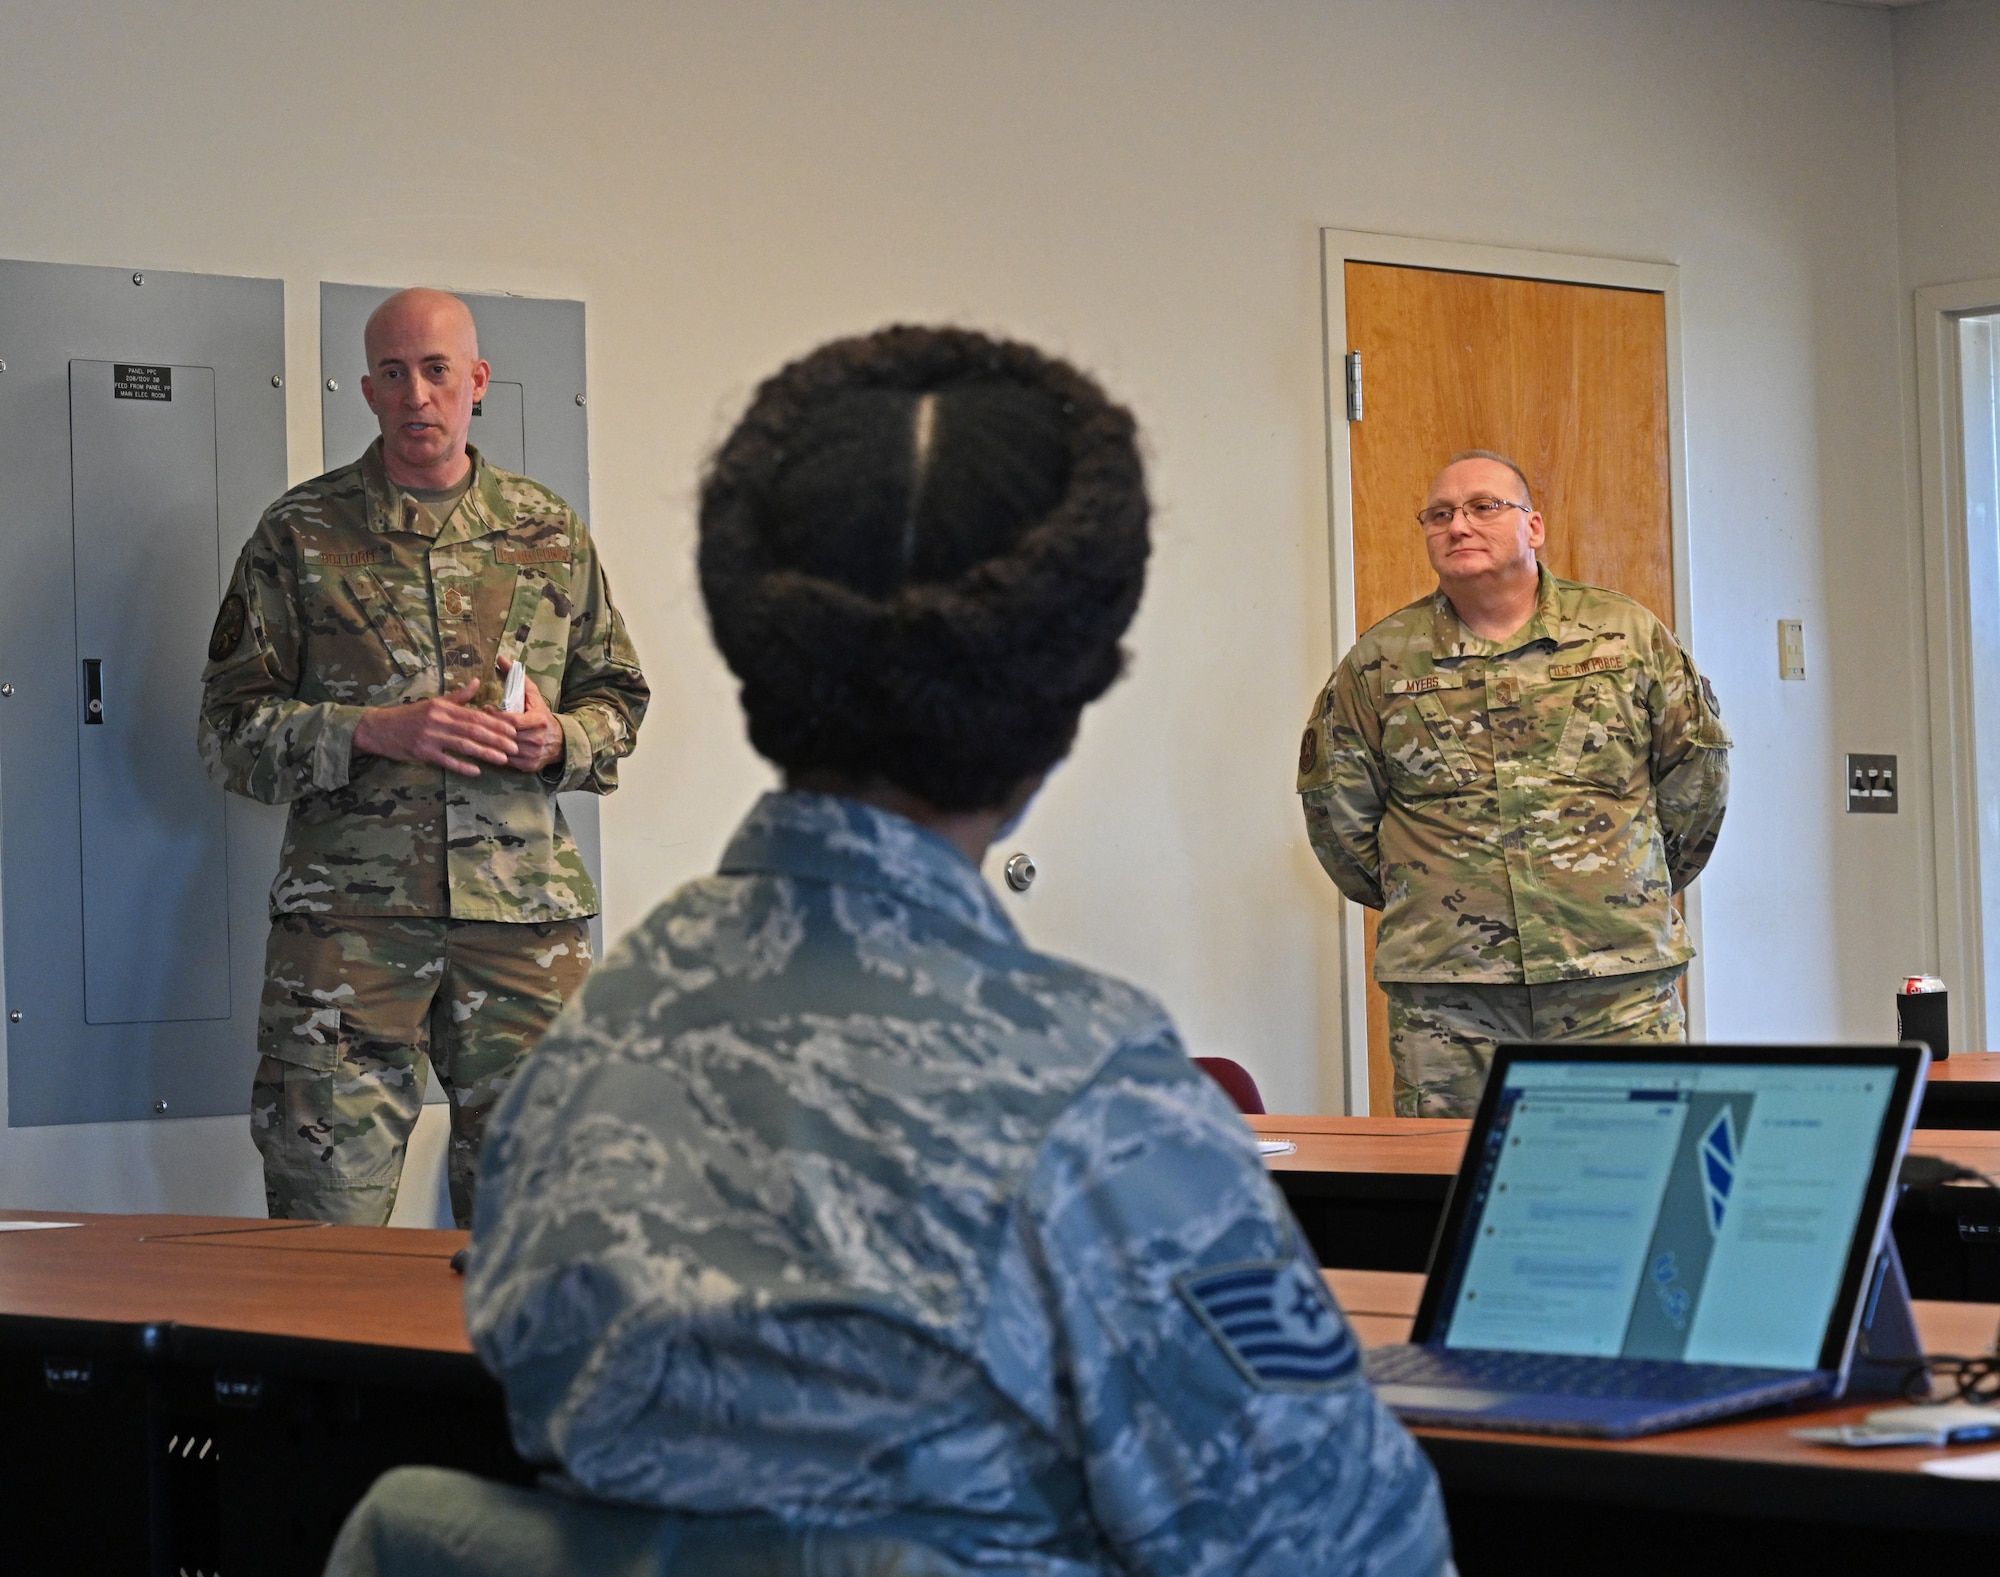 Chief Master Sgt. James Bottorff (left), 175th Mission Support Group superintendent and Chief Master Sgt. Thomas Myers, 175th Communications Squadron superintendent speak with Airmen during the 175th Wing's first additional duty first sergeant's symposium at Warfield Air National Guard Base at Martin State Airport, Middle River, Md., Dec. 2, 2020.